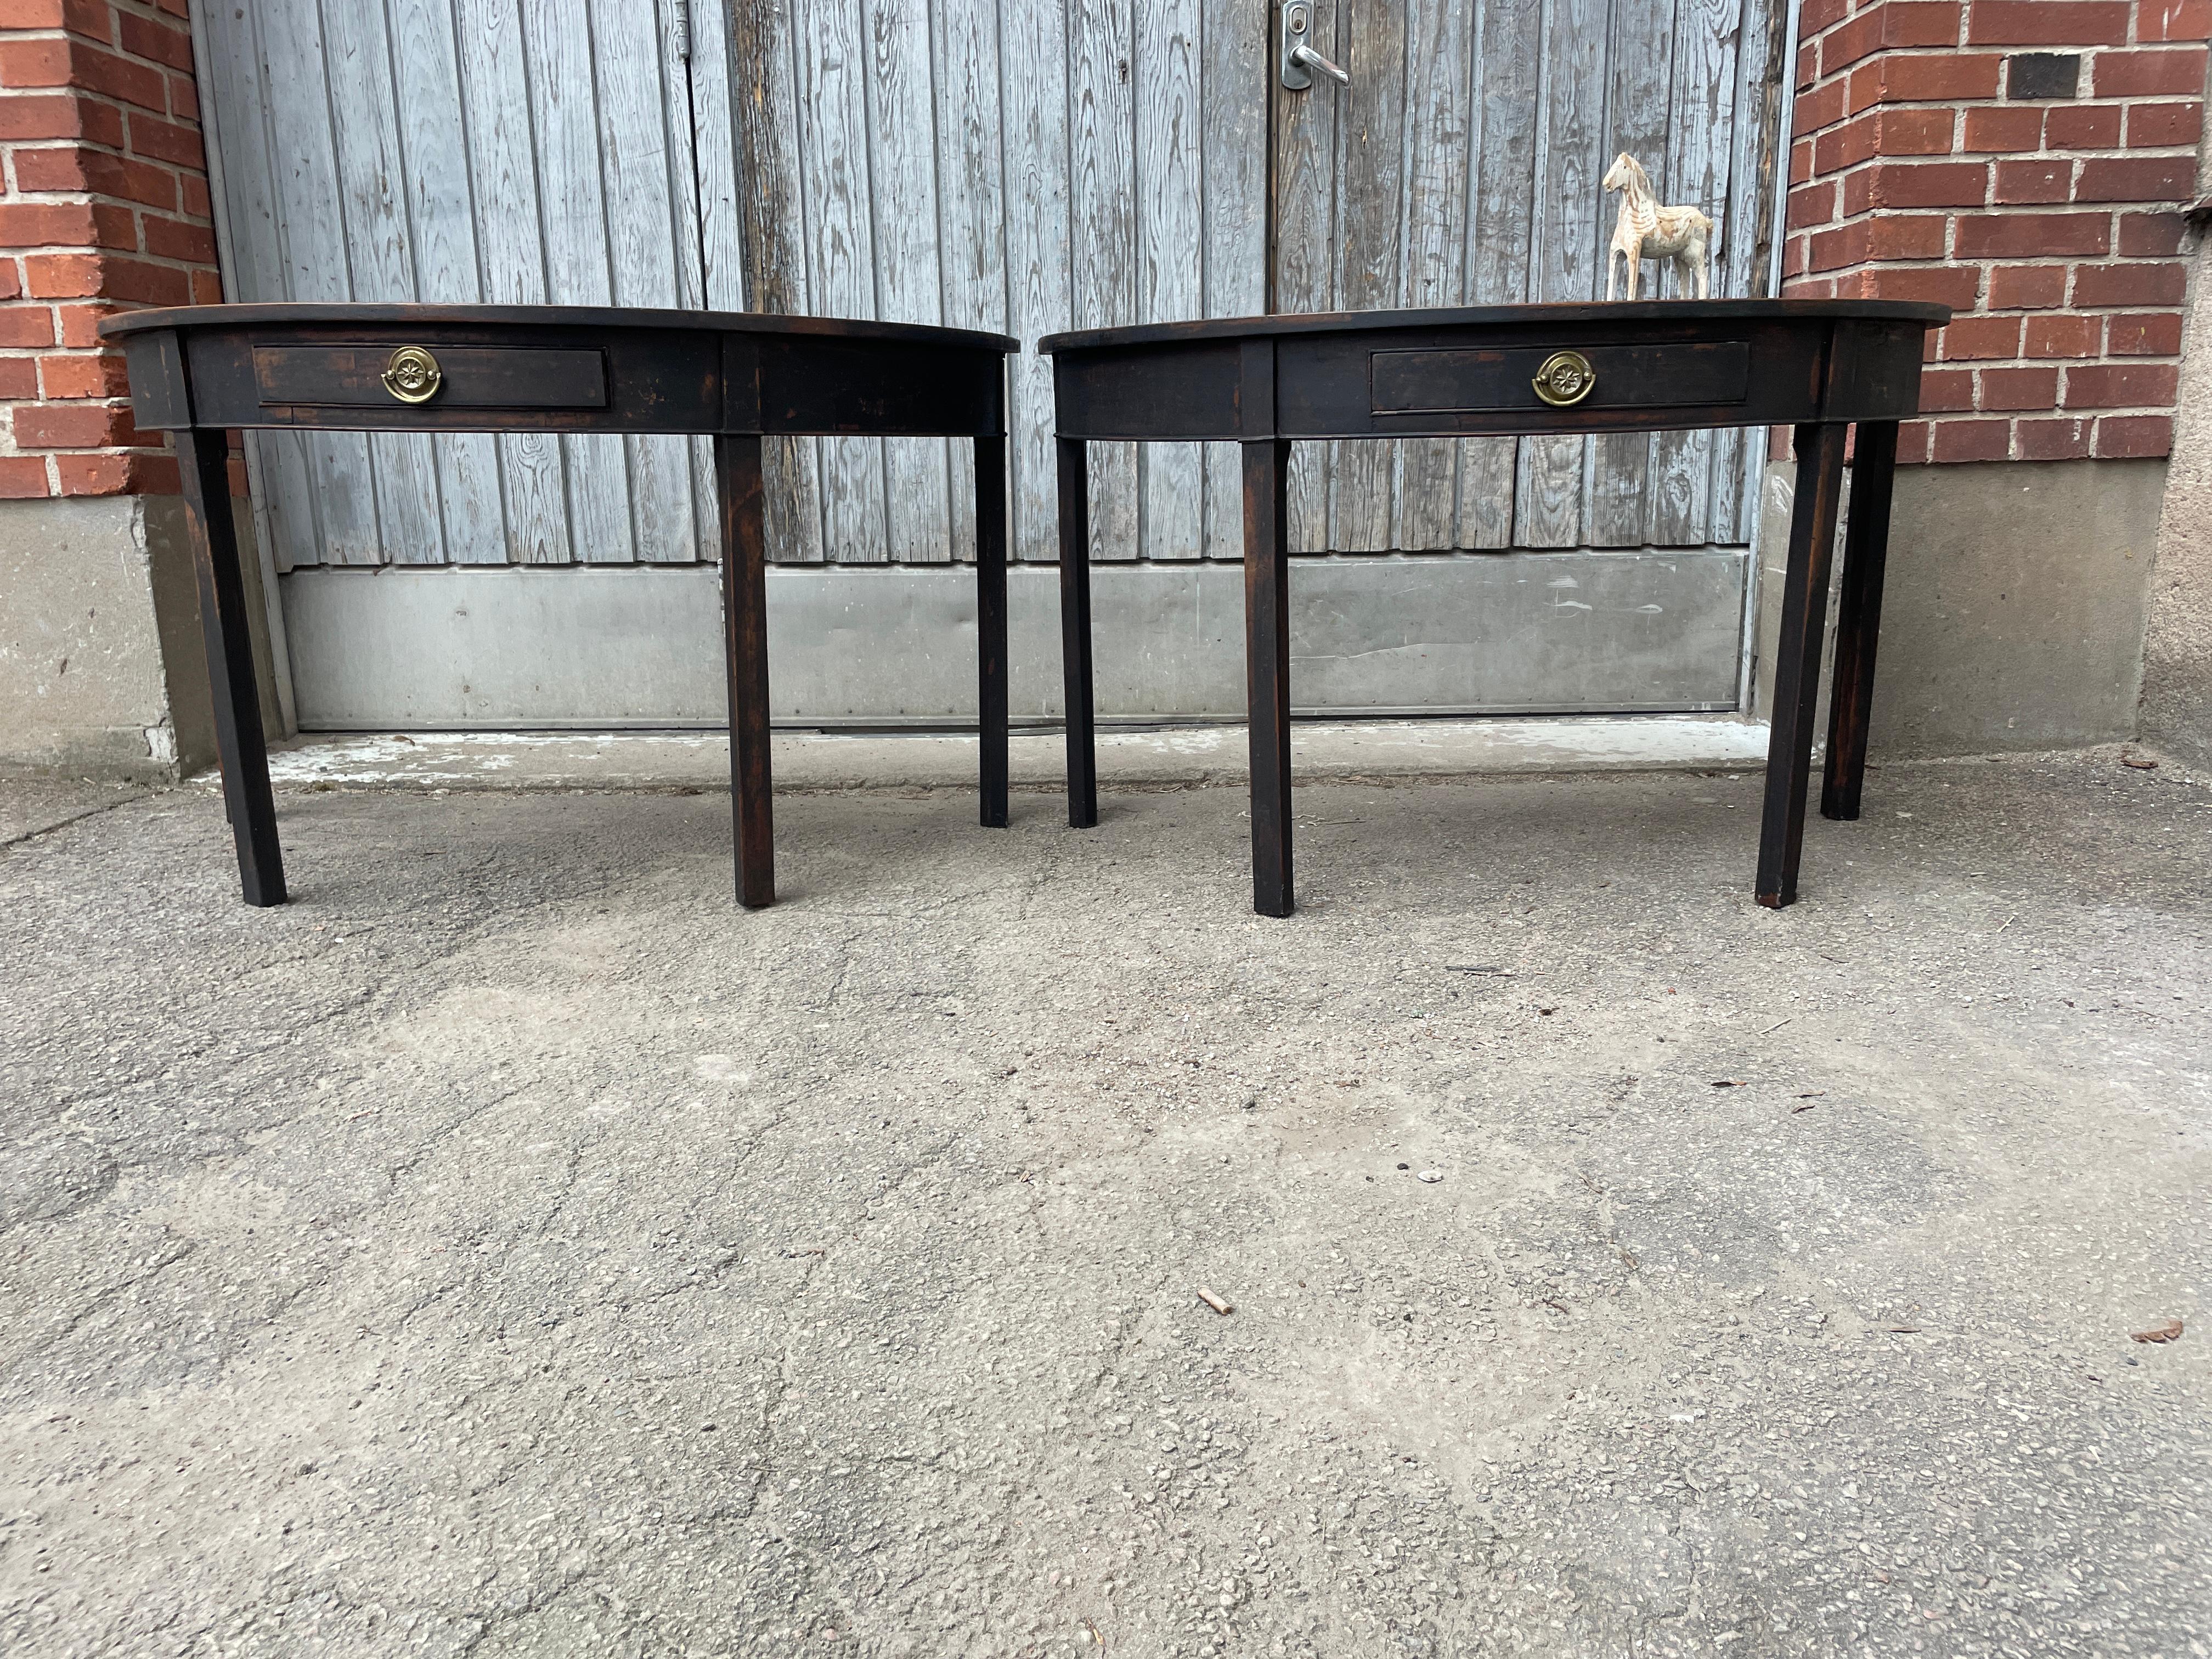 Black Painted Gustavian Demilune Table Consoles, A Pair

Impressive Pair of Black Swedish Half-Round Demi-Lune Tables with Brass Hardware. Put together this set makes a fantastic round table. Very functional pieces either used individually or